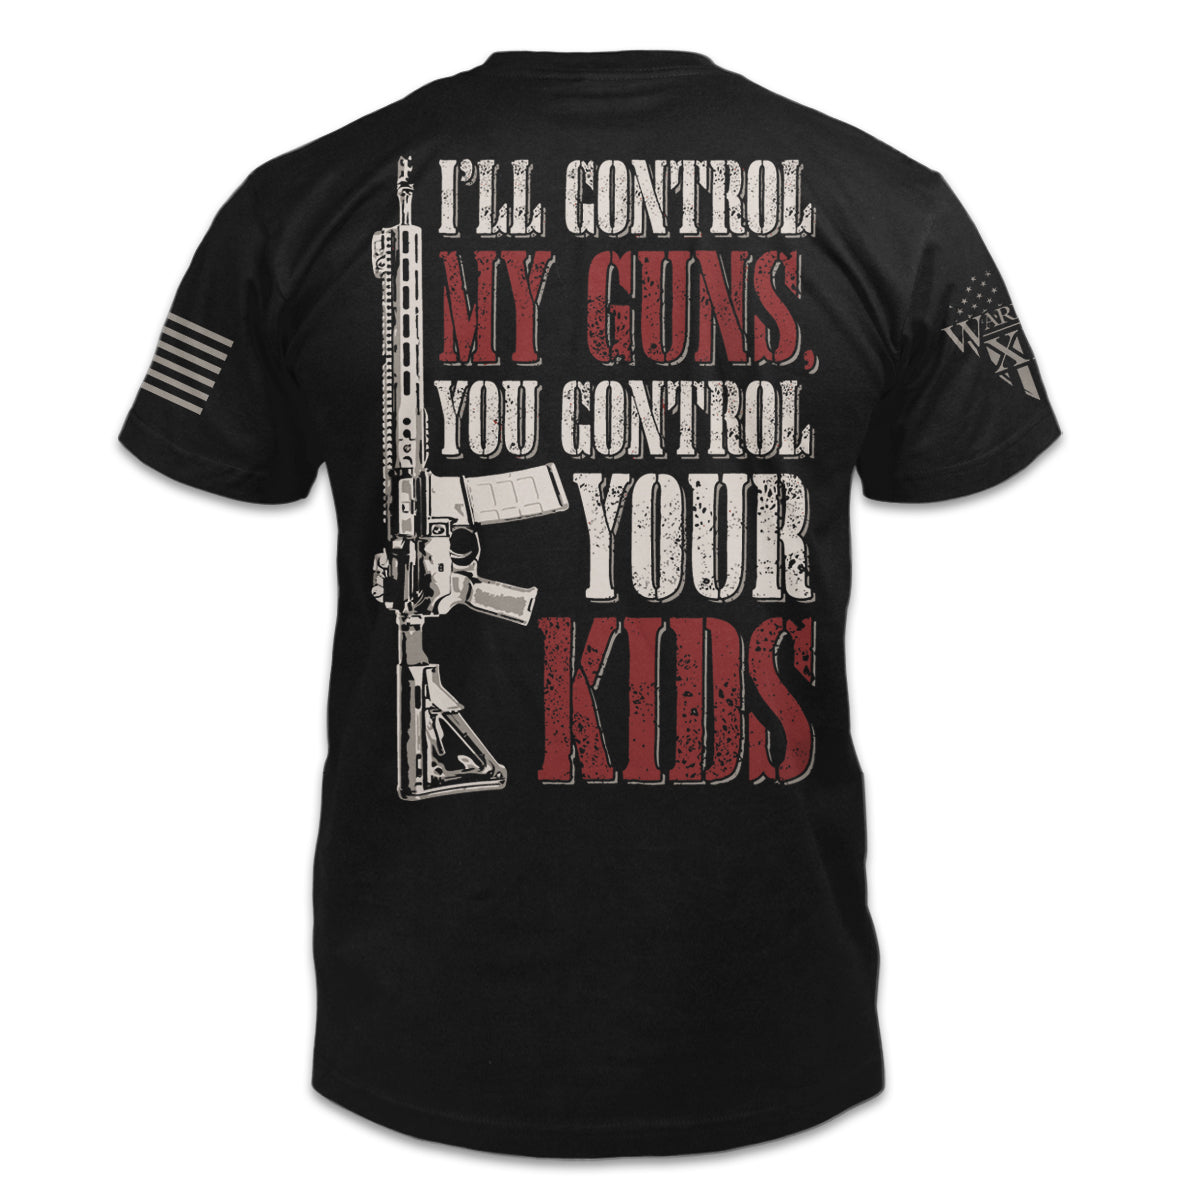 A black t-shirt with the words "I'll control my guns, if you control your guns" with a gun printed on the back of the shirt.